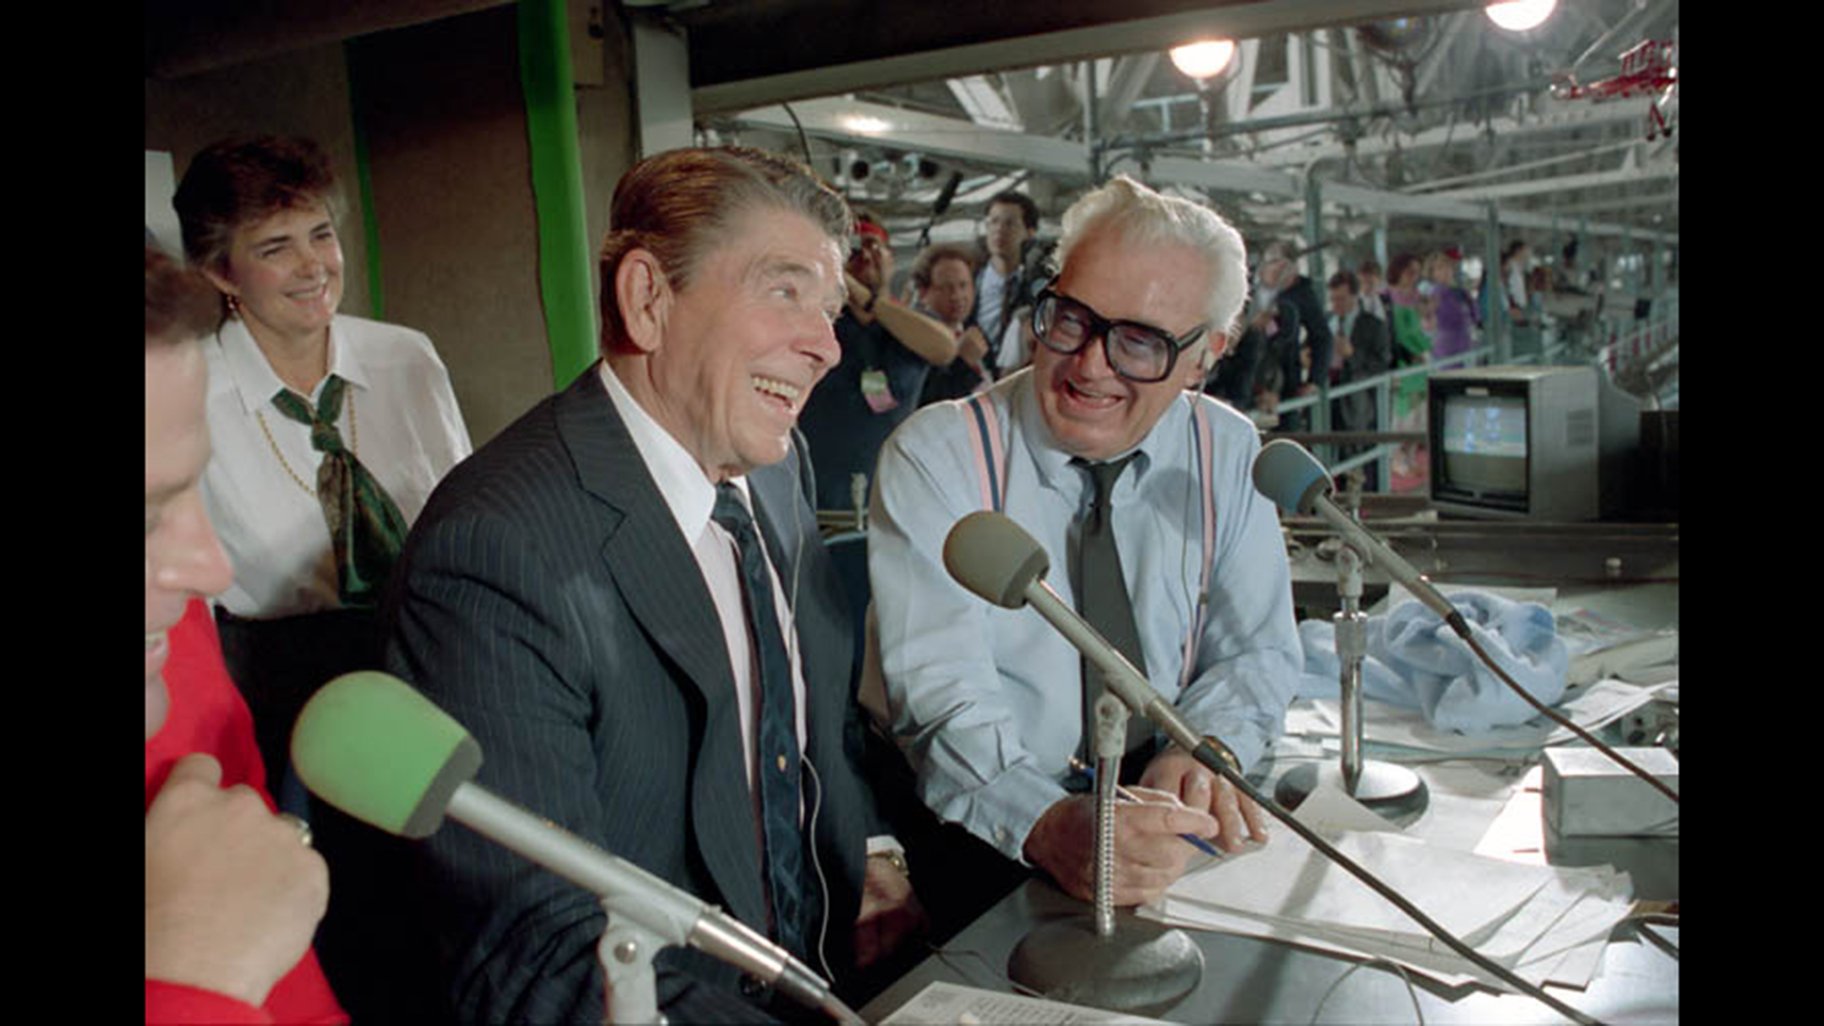 The Remarkable Life of the 'Legendary Harry Caray